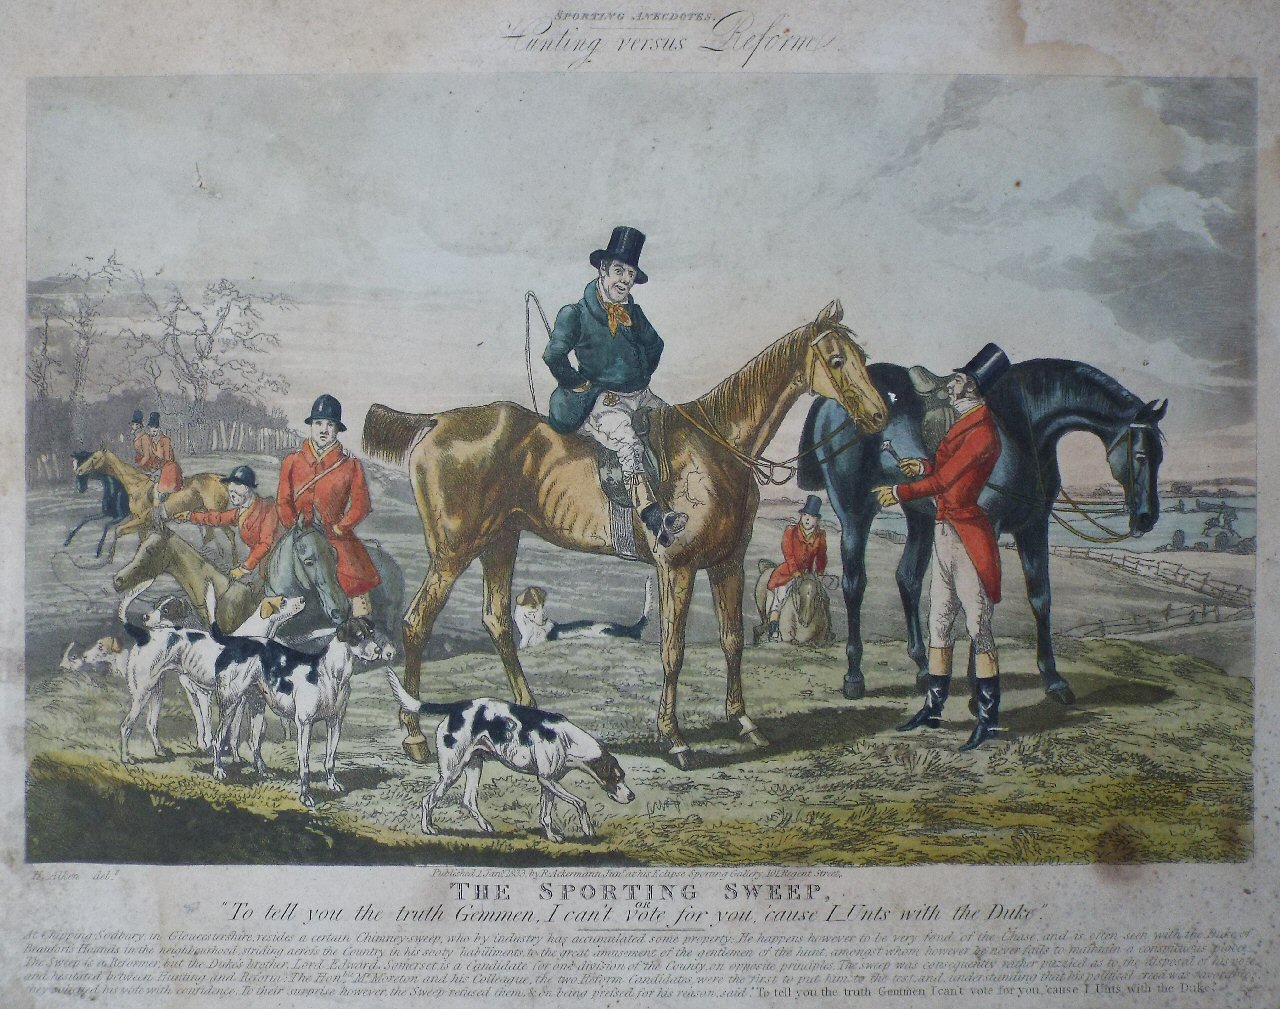 Aquatint - Sporting Anecdotes. Hunting versus Reform. The Sporting Sweep.